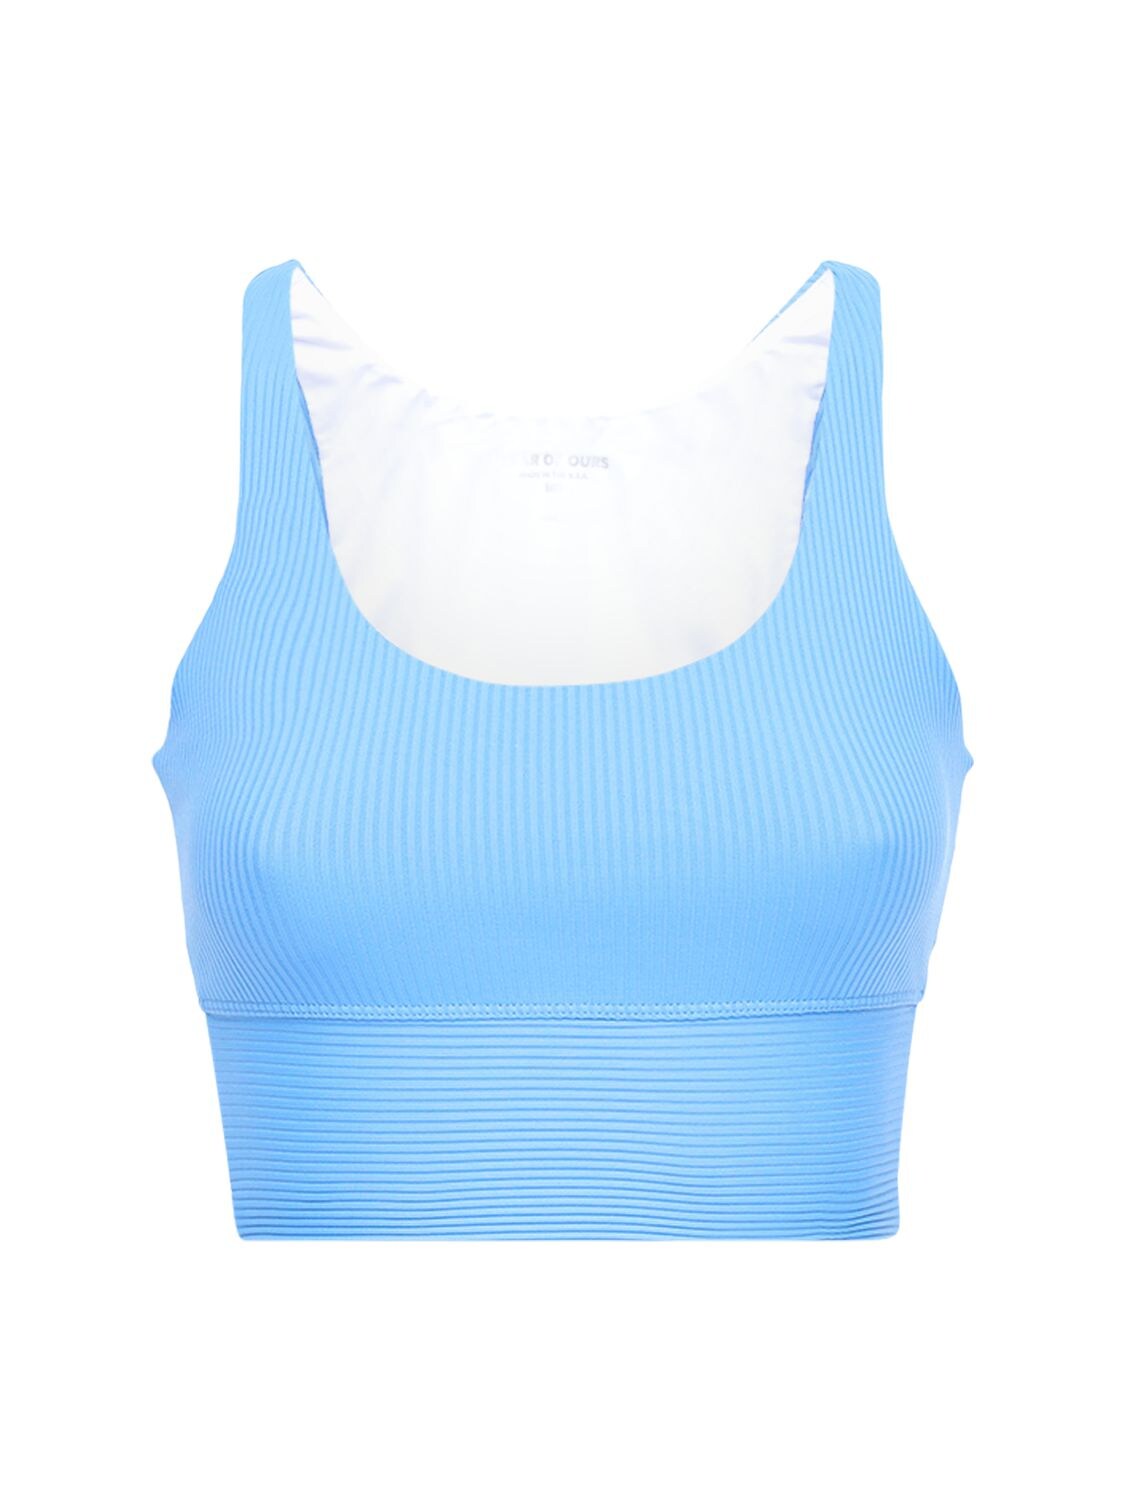 YEAR OF OURS RIBBED GYM BRA TOP